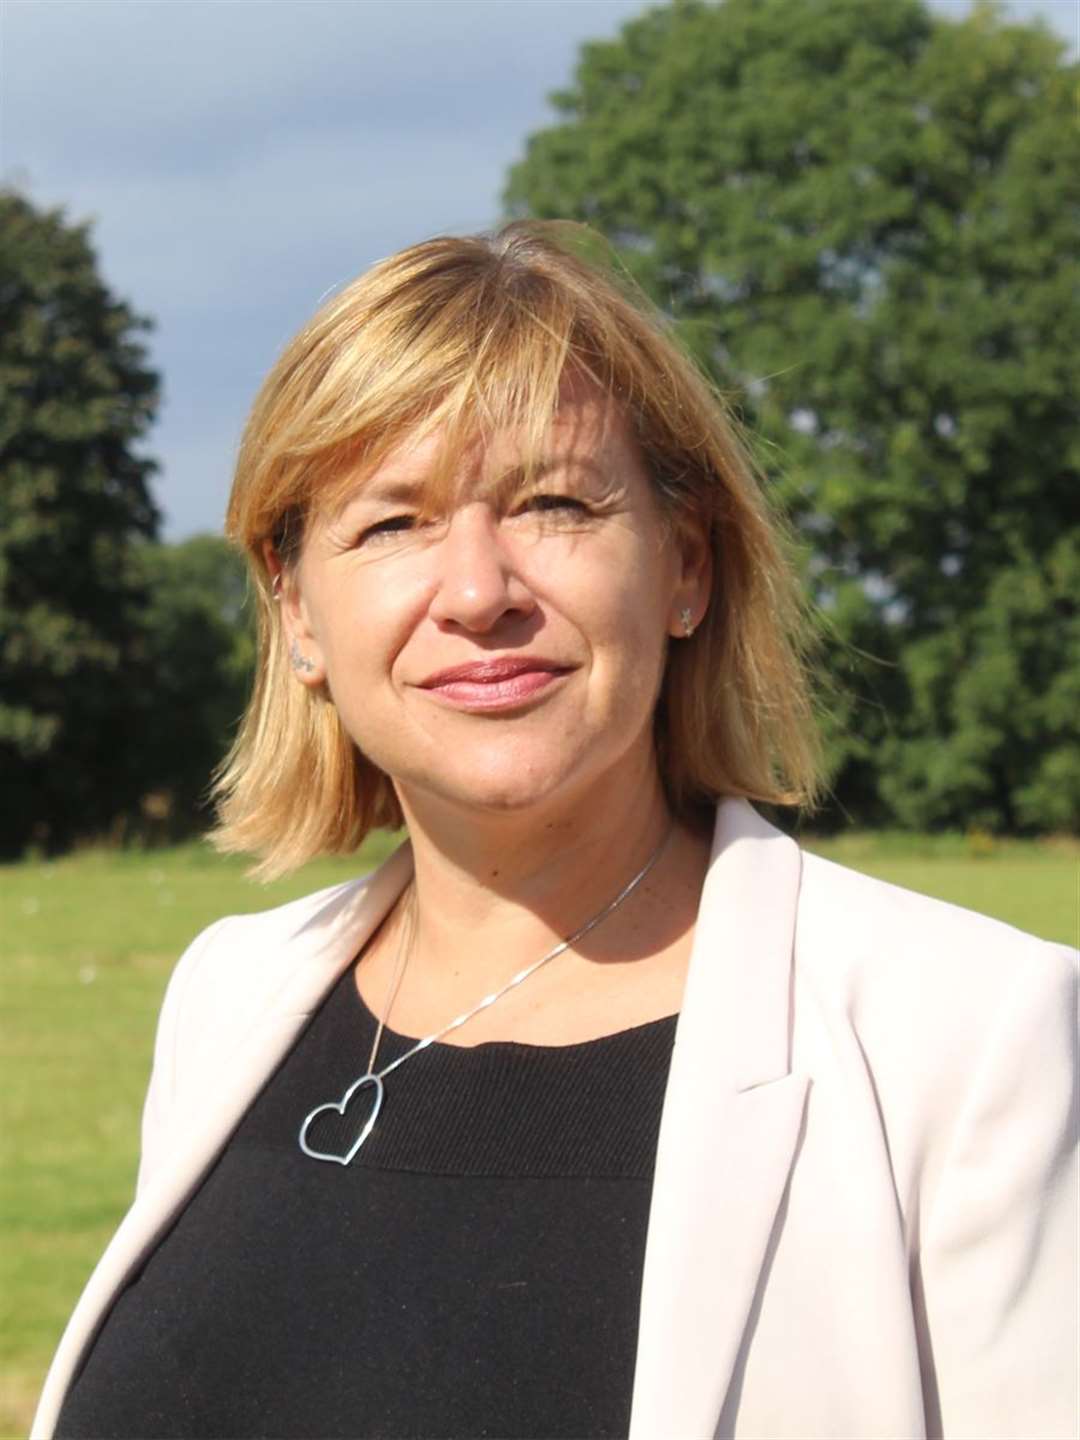 Meopham School's head of school Kate Girling has stepped down from her role. Picture: Swale Academies Trust